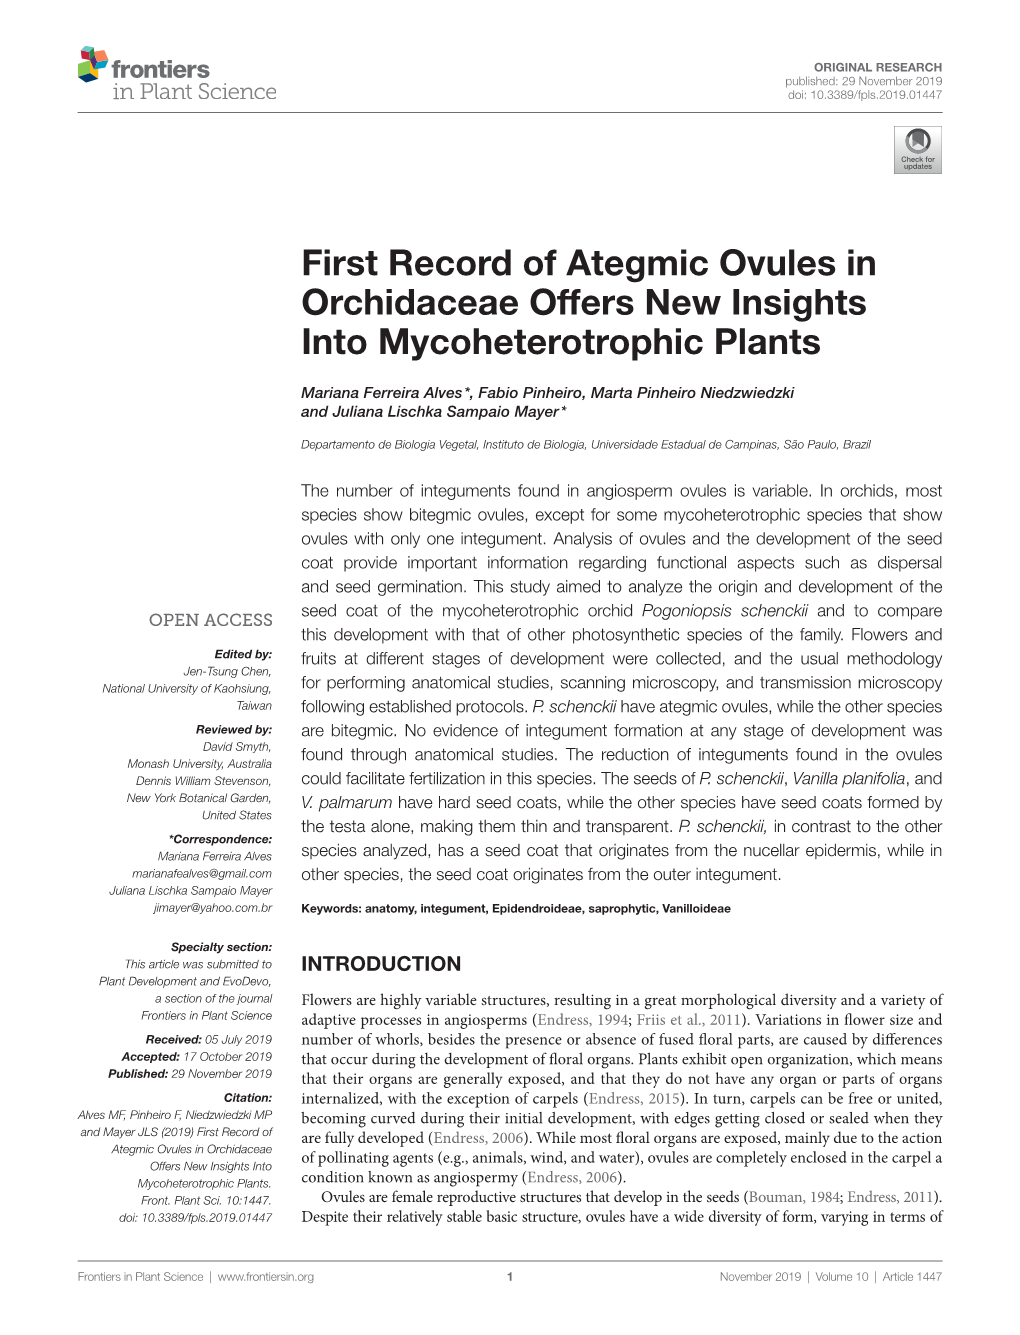 First Record of Ategmic Ovules in Orchidaceae Offers New Insights Into Mycoheterotrophic Plants